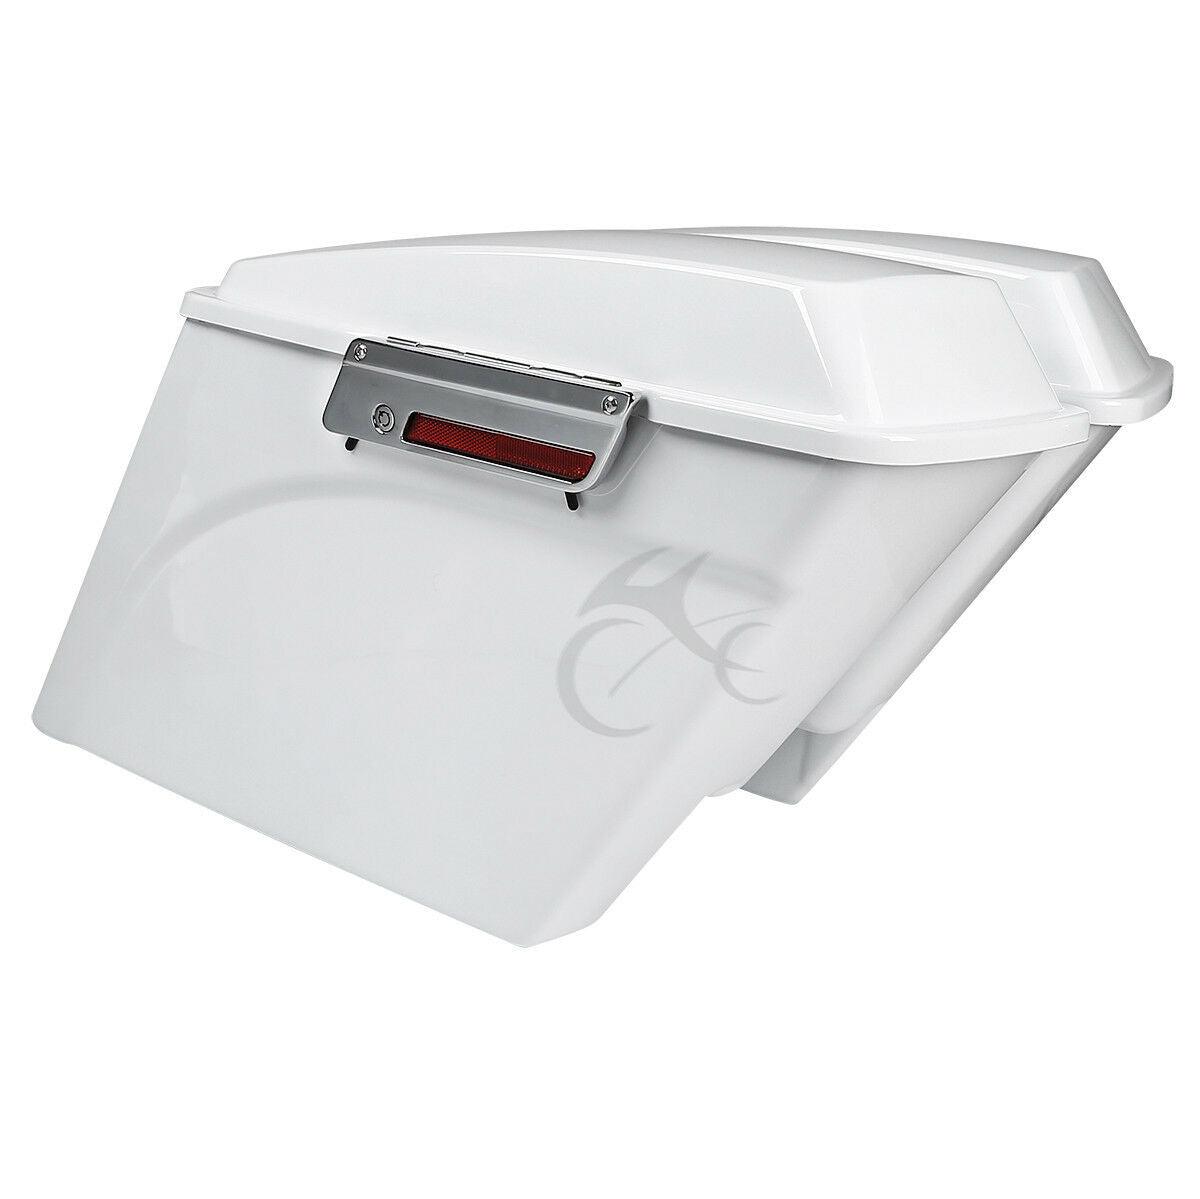 5" Stretched Saddlebags w/Lid Latches Fit For Harley Street Electra Glide 93-13 - Moto Life Products